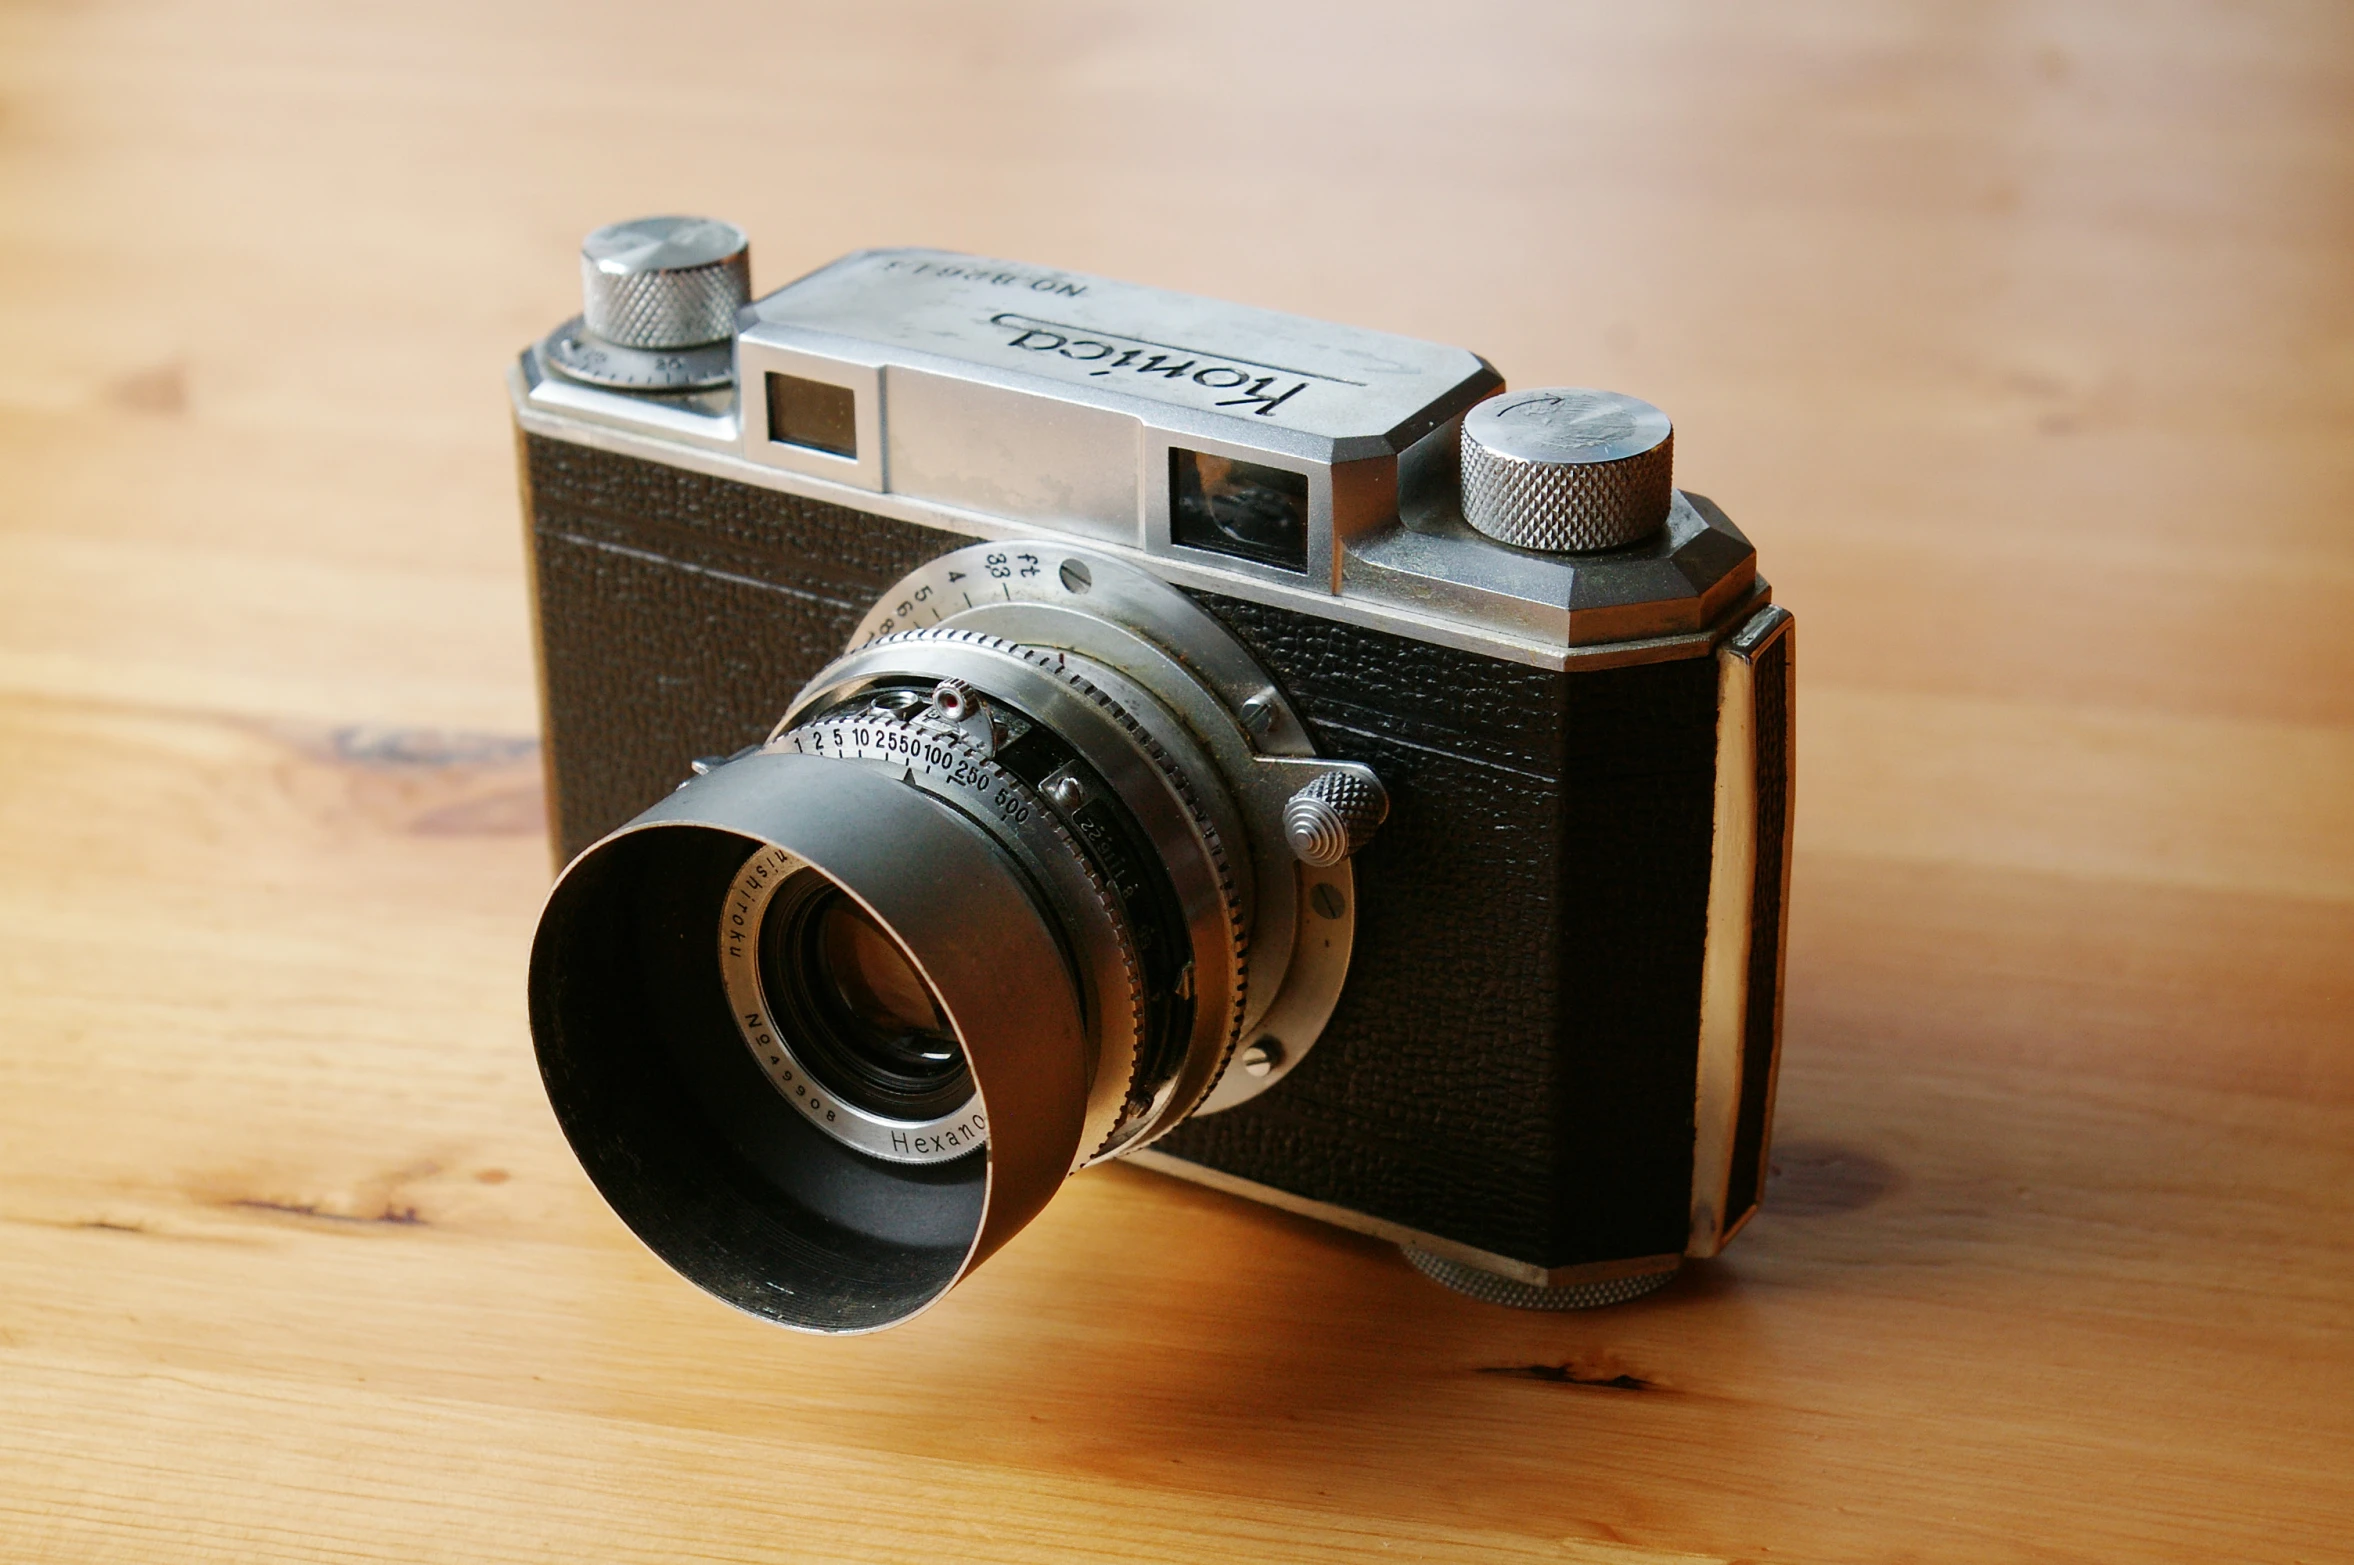 an old - fashioned camera with a lens attached